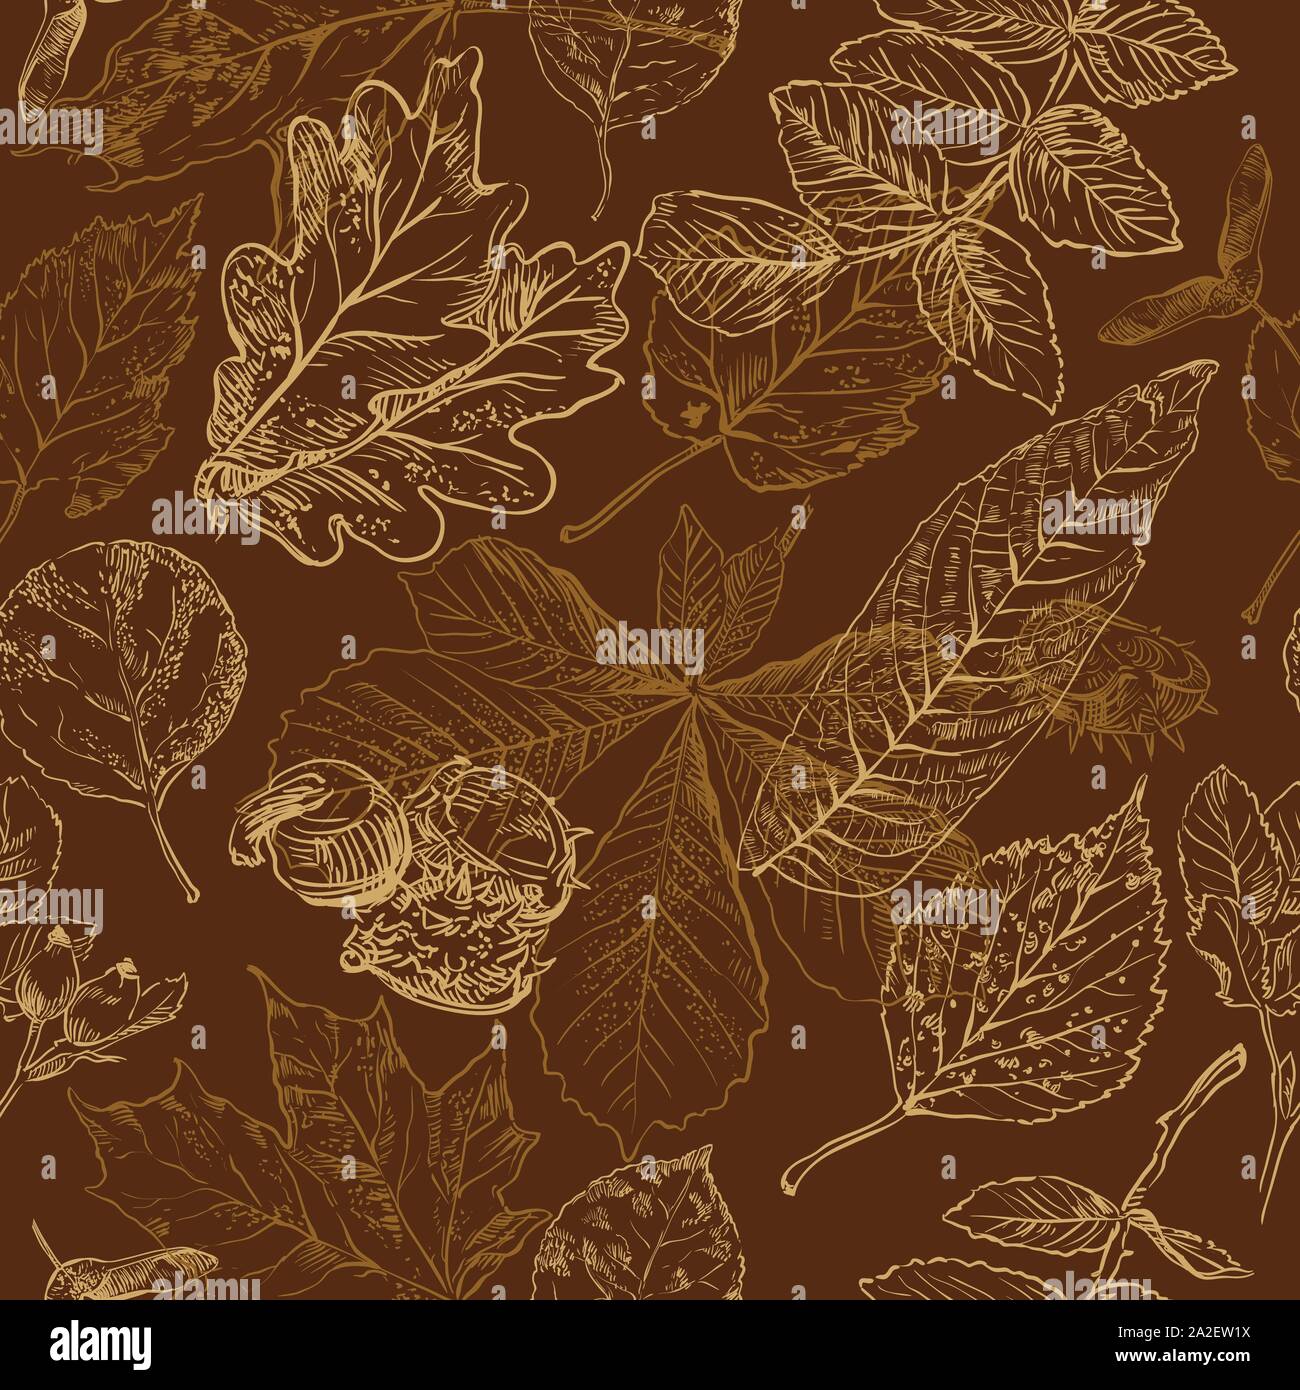 Vector autumn hand drawing seamless pattern with horse chestnut, oak, rose hip, Rowan leaves outline on the brown background. Fall line art of foliage Stock Vector